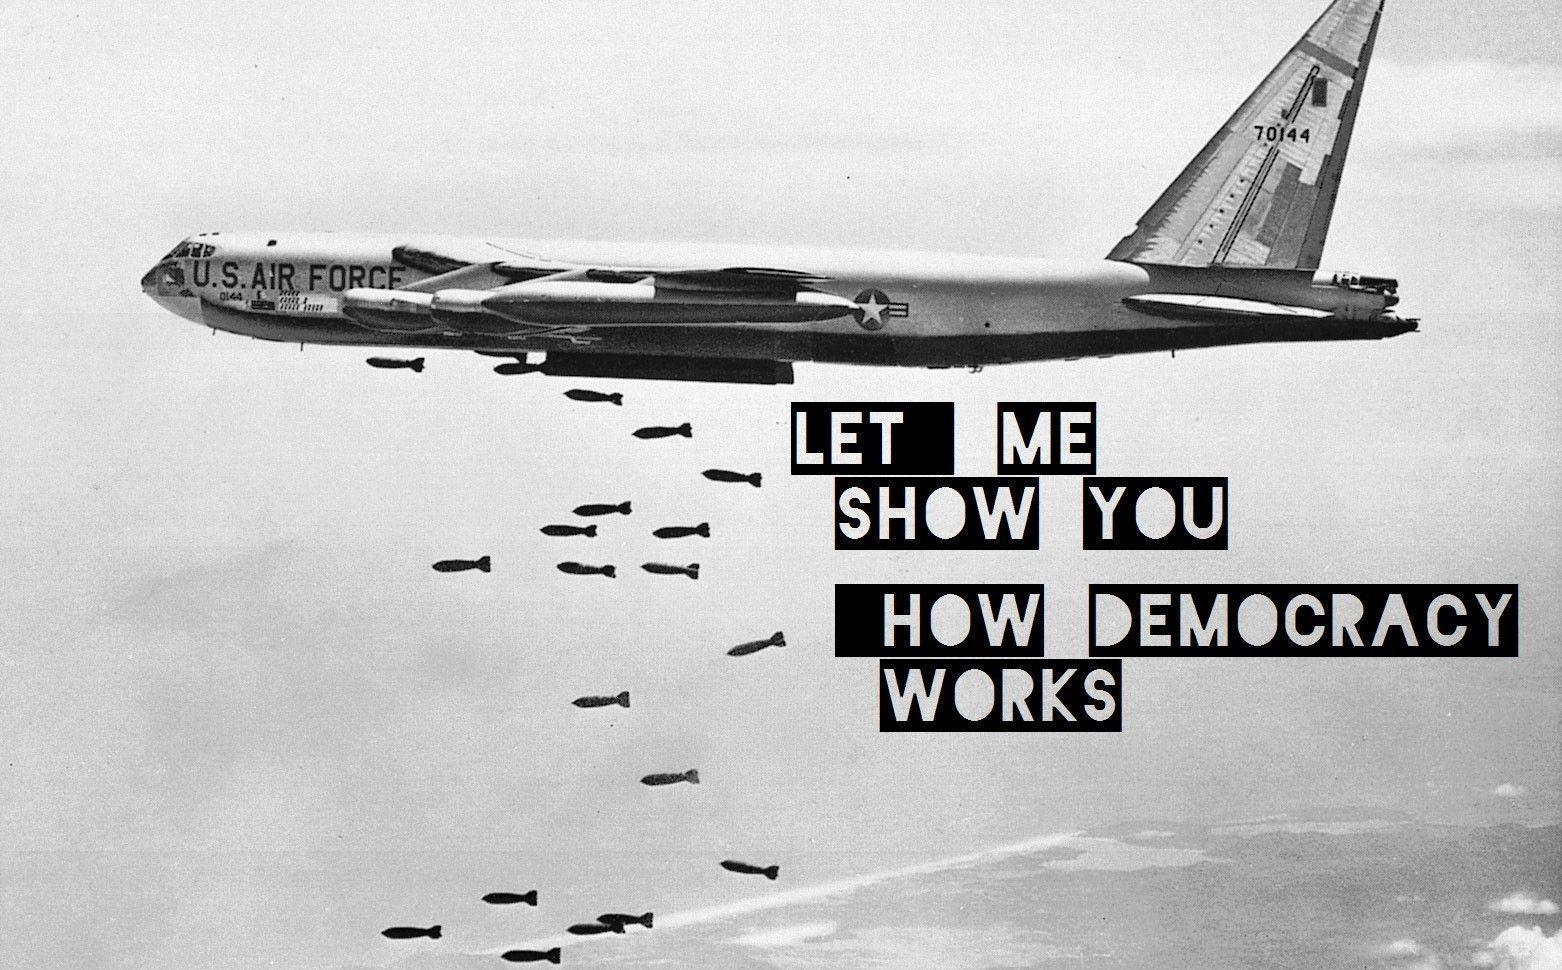 Aircraft, Bombs, Typography, Democracy, B 52 Stratofortress